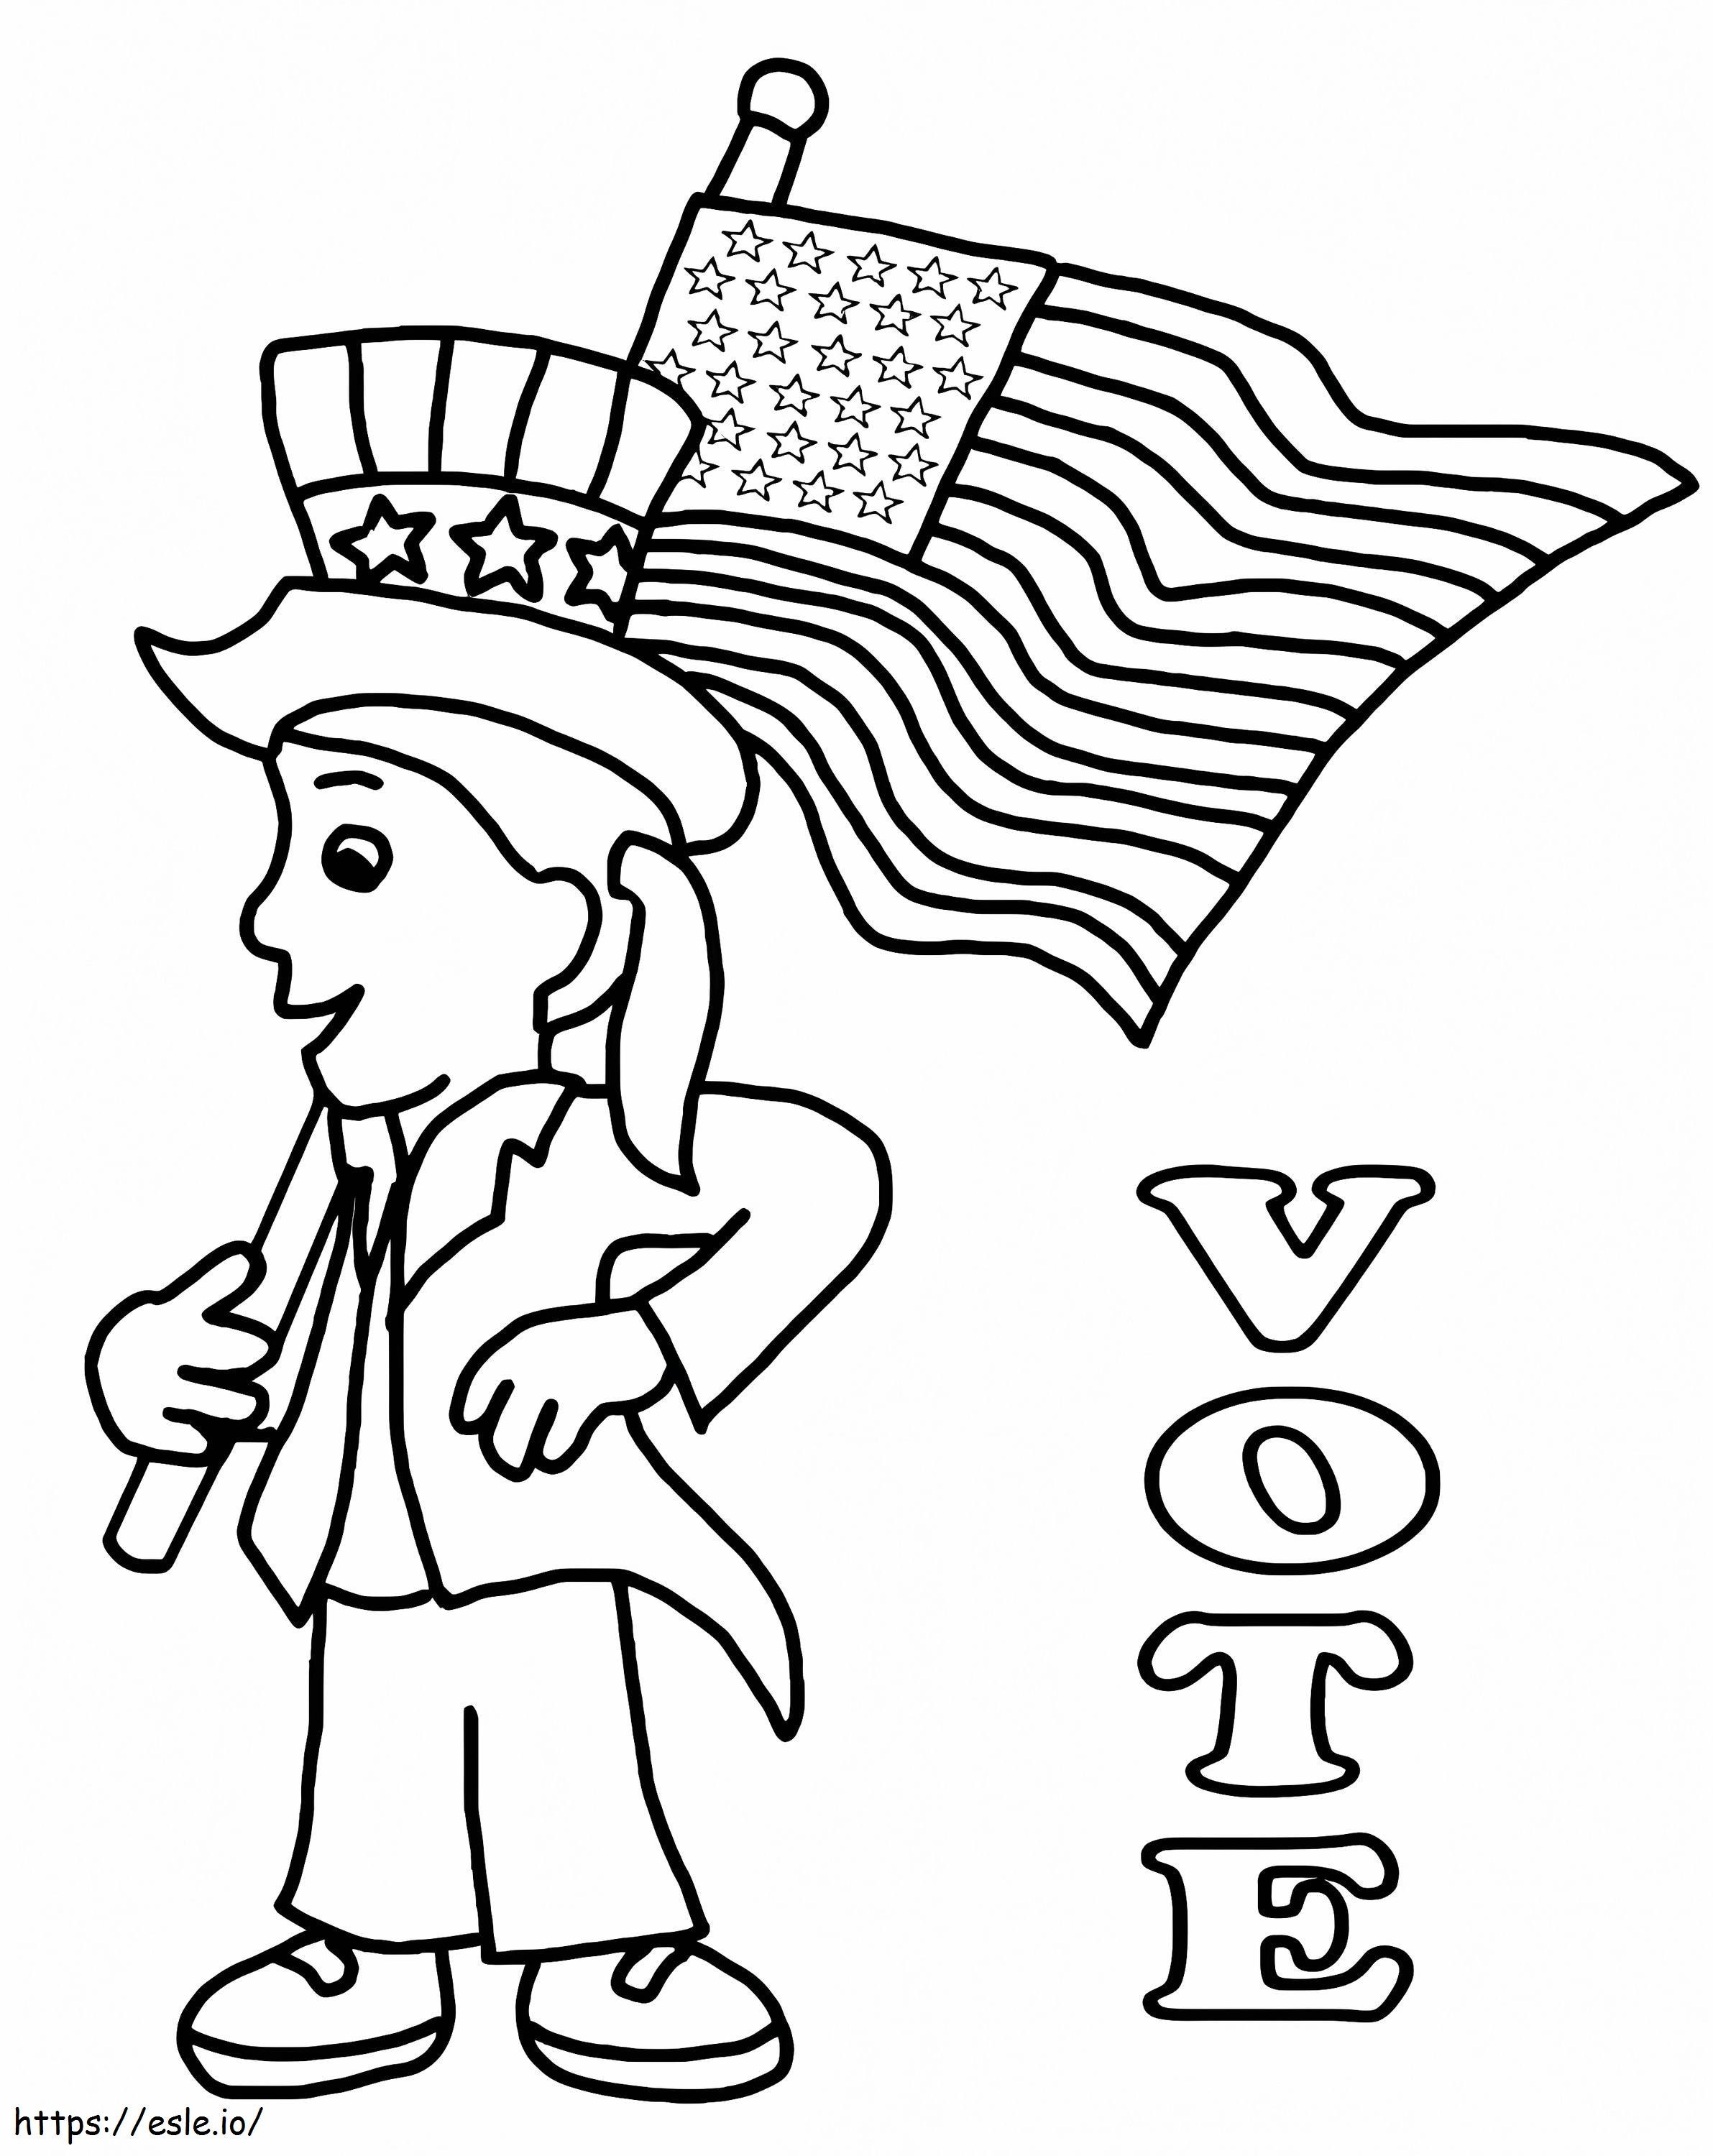 Election Day 7 coloring page